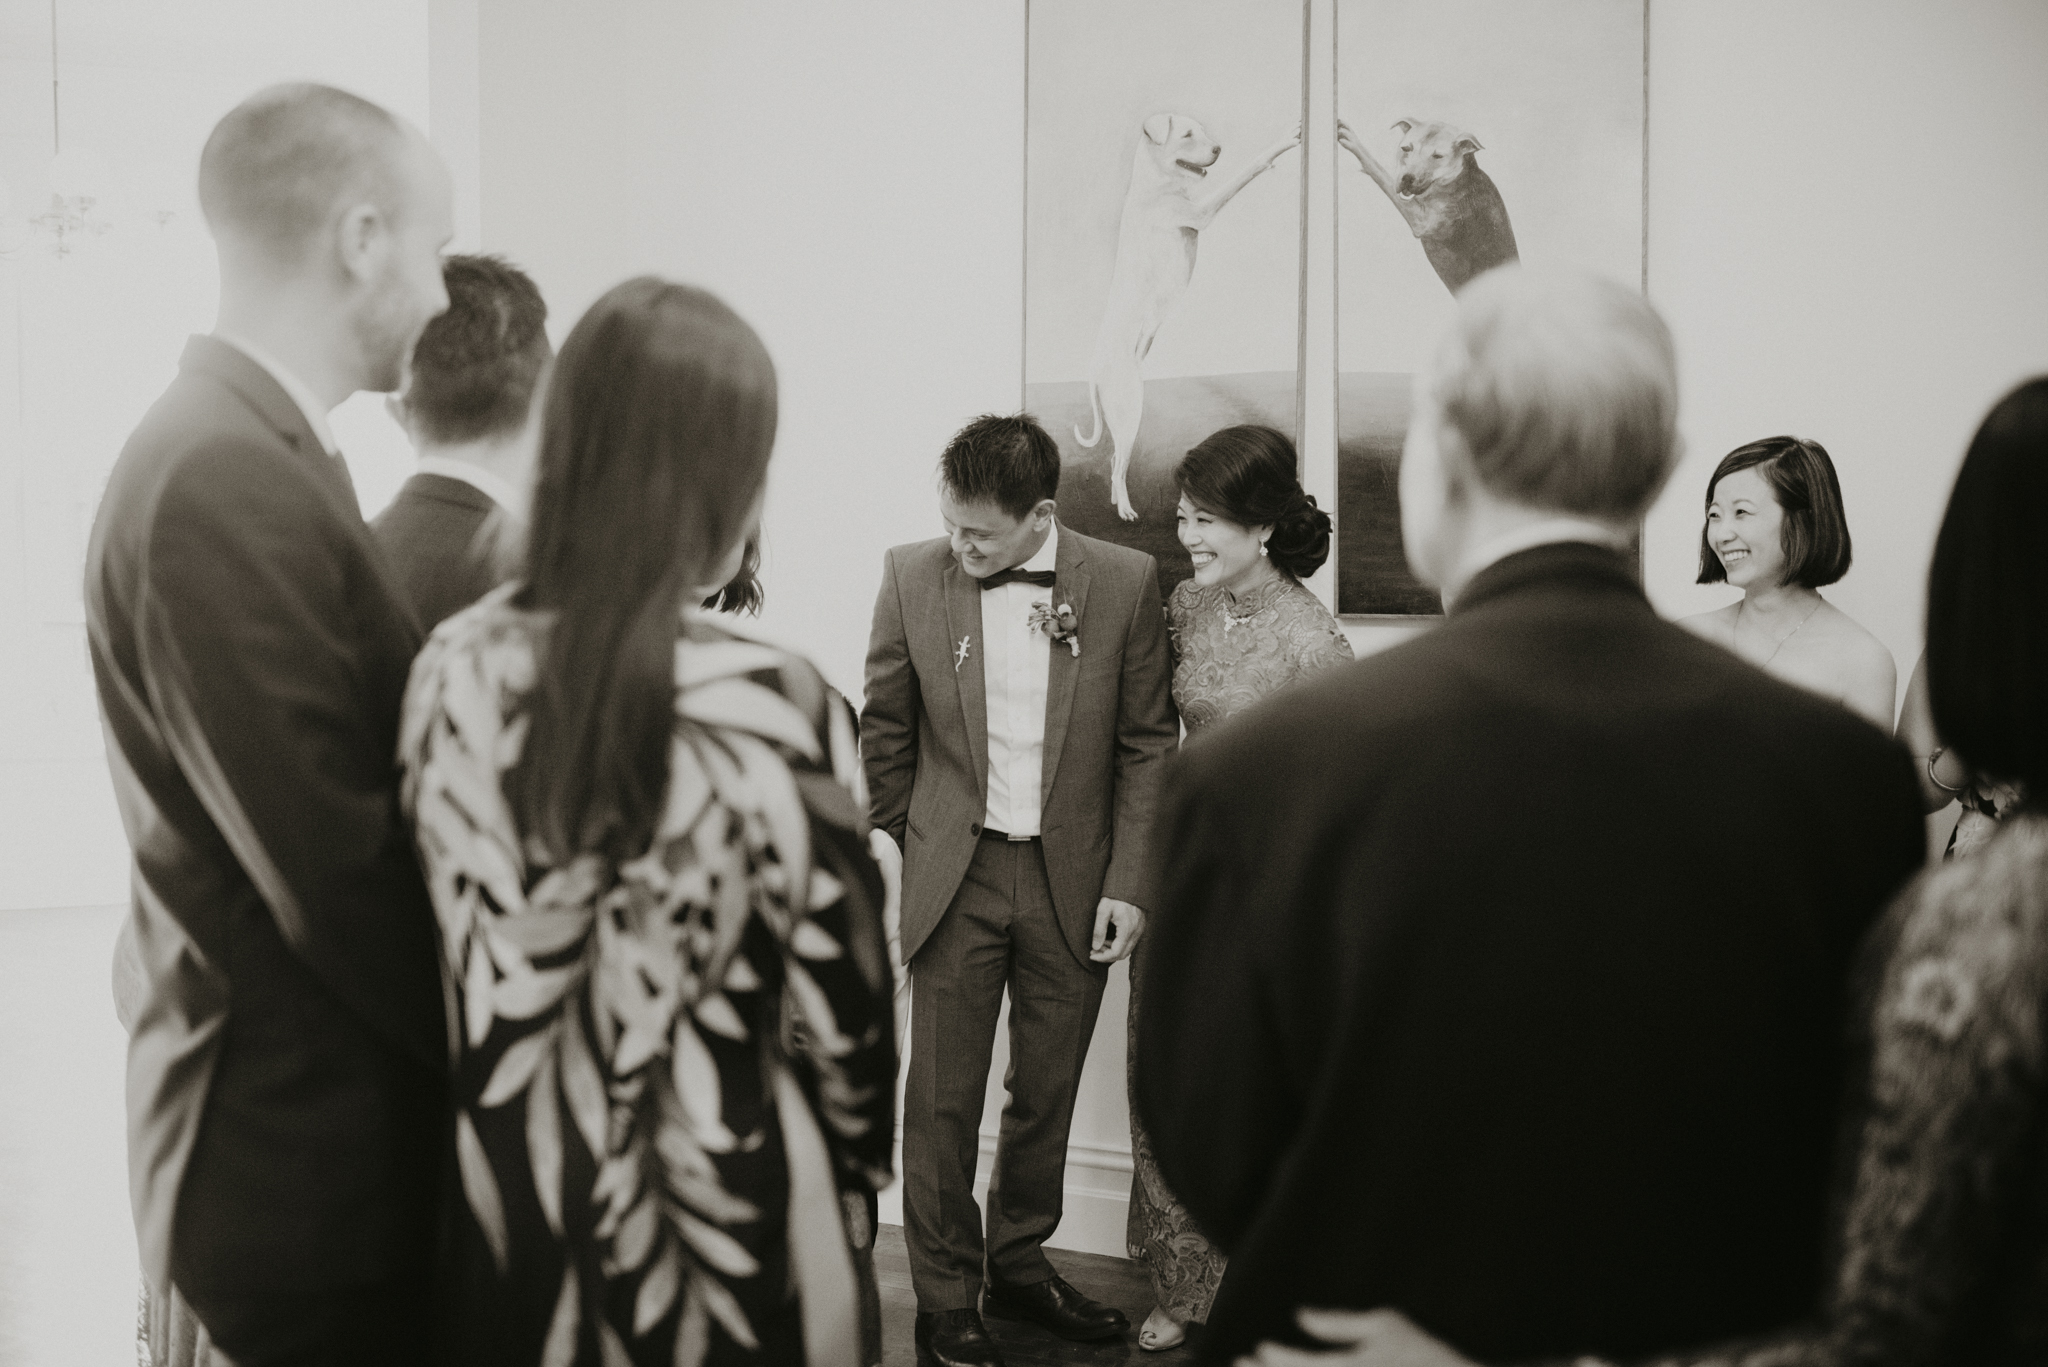 agnes-duy-15th-december-2018-chinese-vietnamese-wedding-tea-ceremony-yarraville-home-house-documentary-candid-photographer-sarah-matler-photography-52